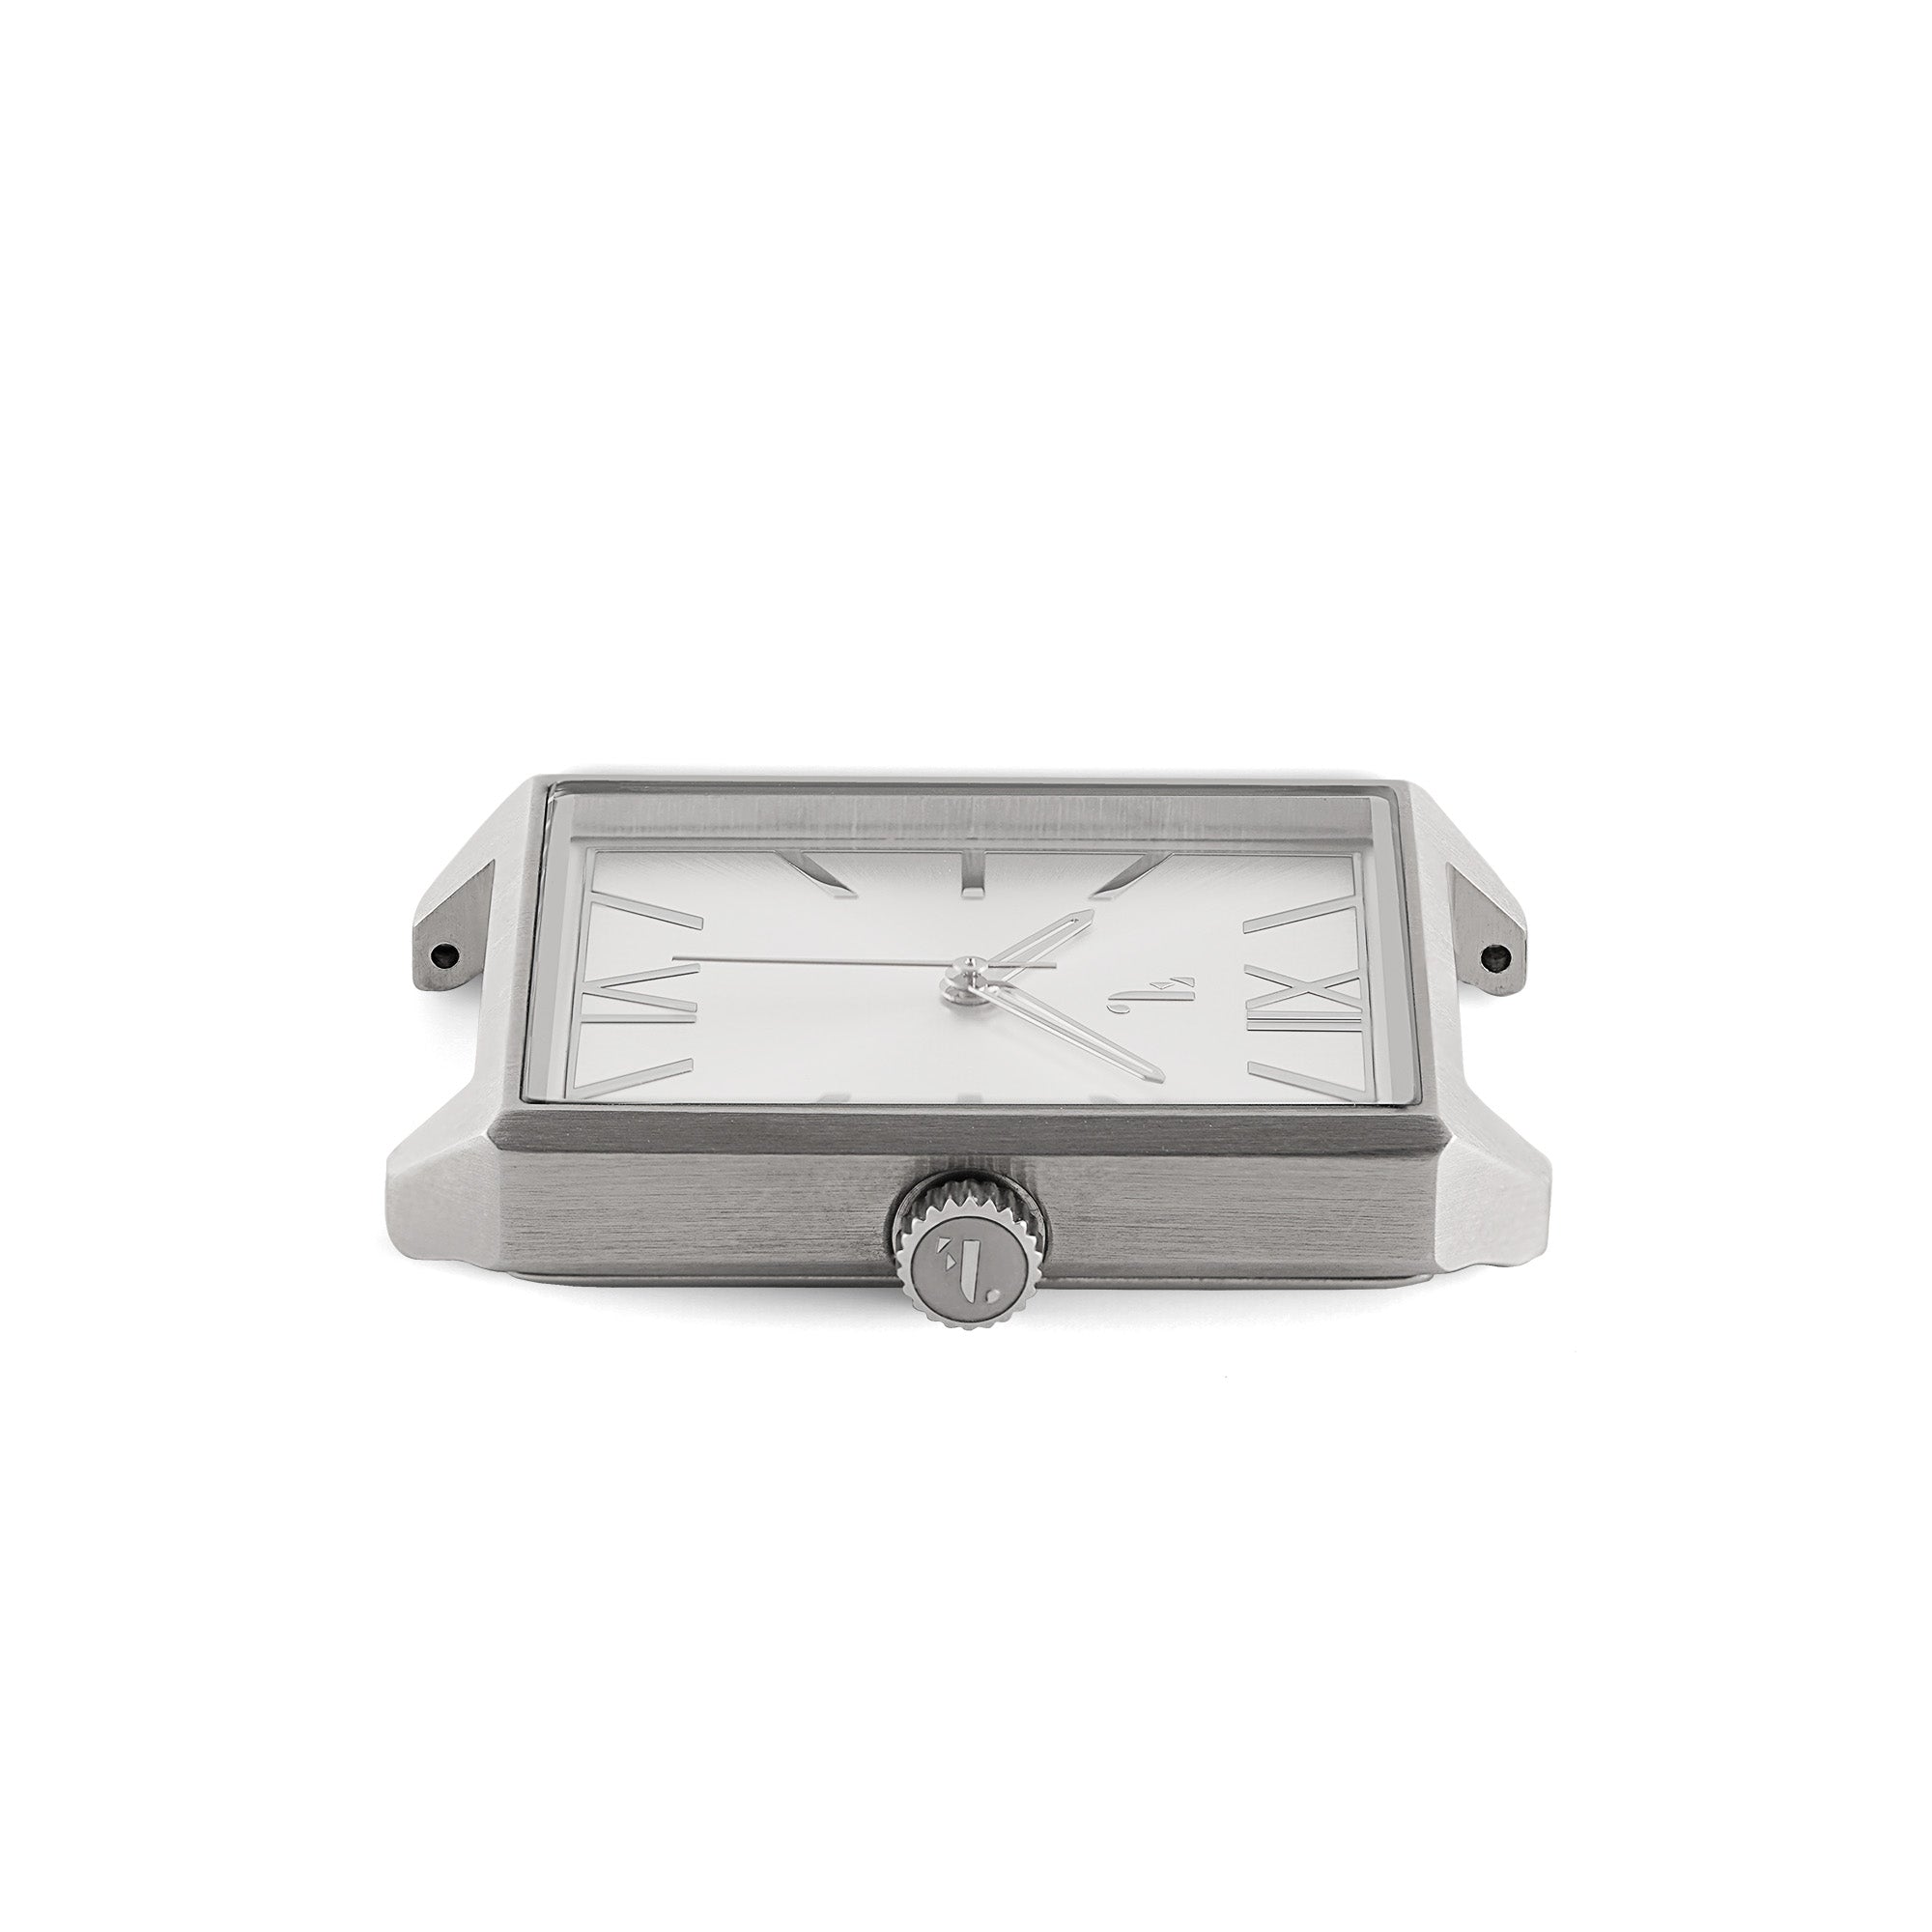 SOHO watch. It is made of a square brushed steel case and a shiny silver dial. It is the ideal watch for a man, with its three hands, its quartz mechanism, its water resistance and its 2 year warranty.